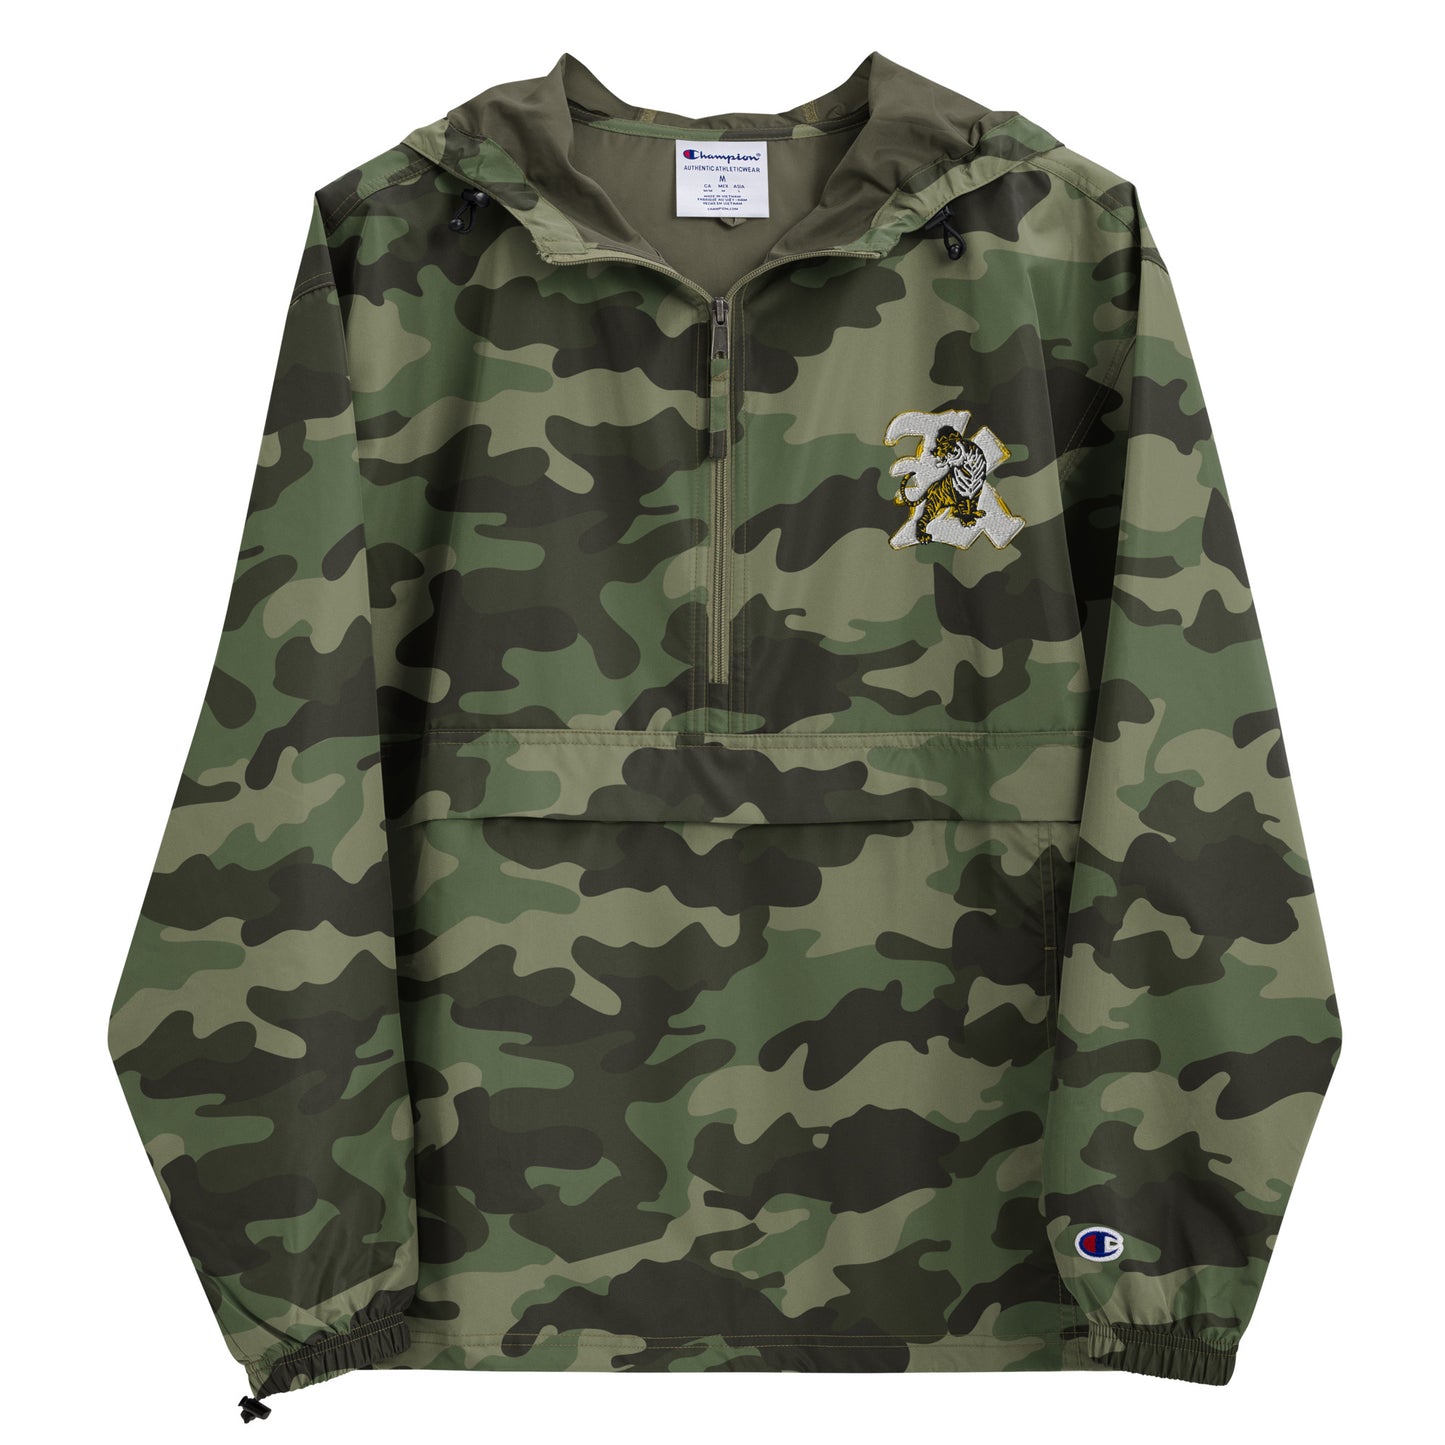 Kamio "Tiger Champion" Packable Jacket